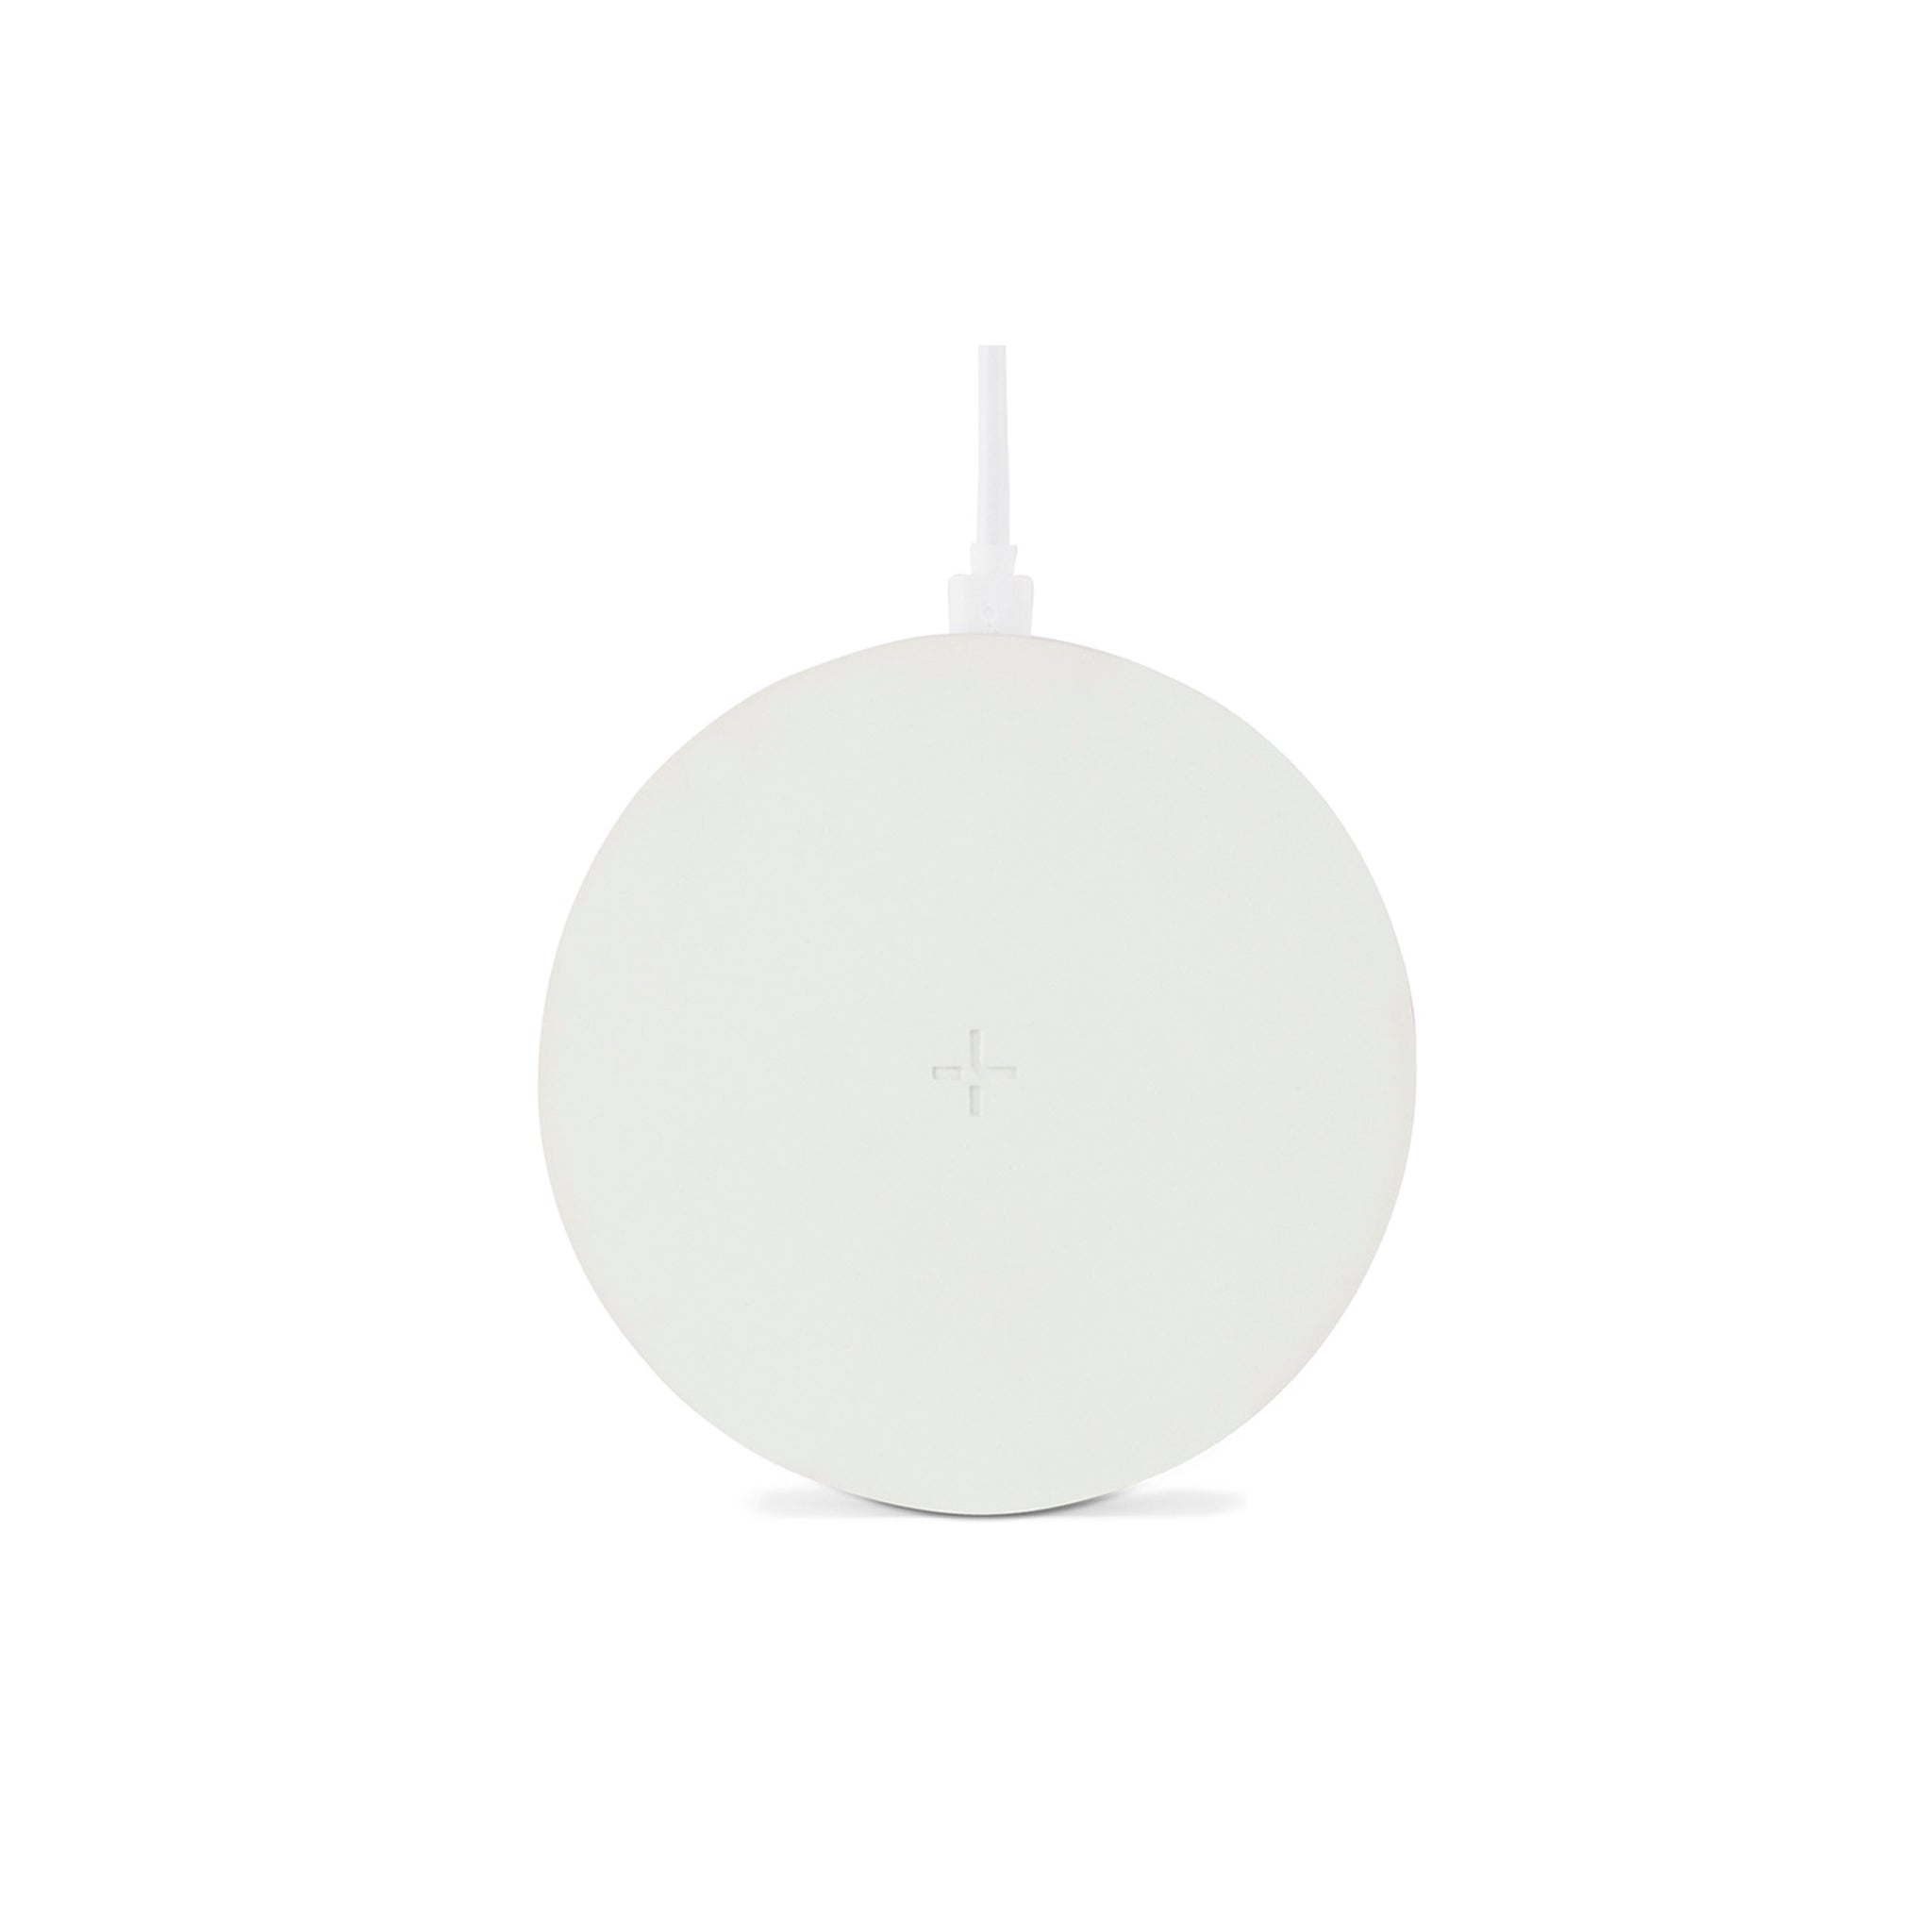 Tylt - Puck Wireless Charging Pad 10w - White And Cork